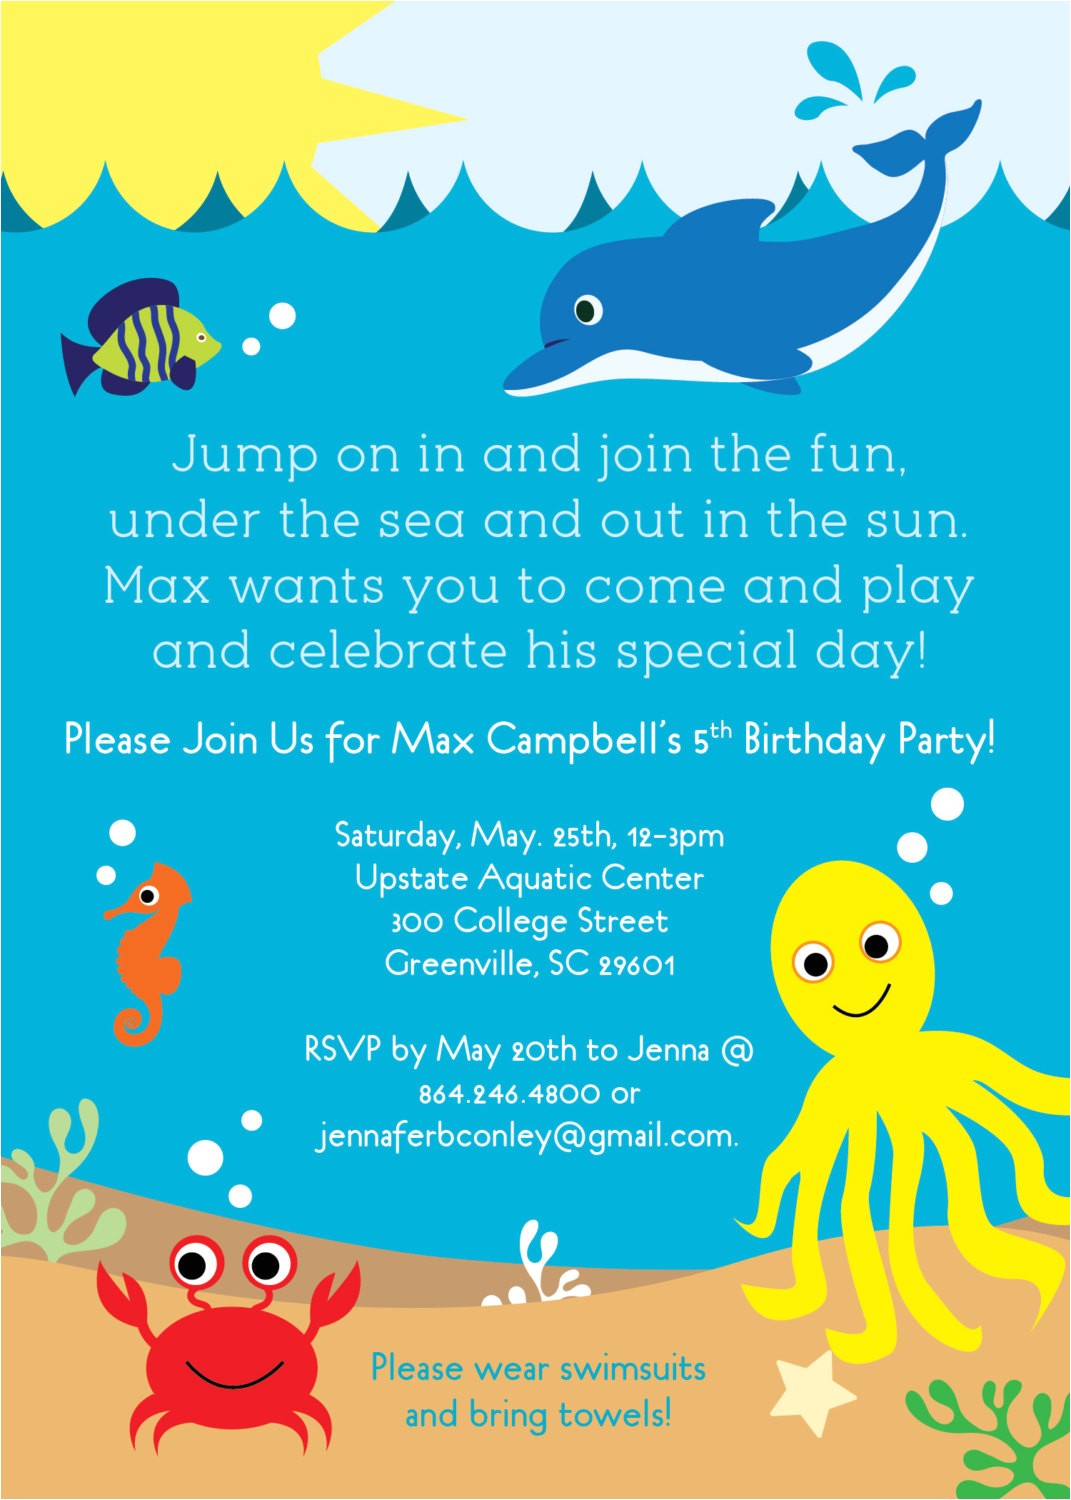 6810094 under the sea birthday party invitations boy or girl sea life creatures